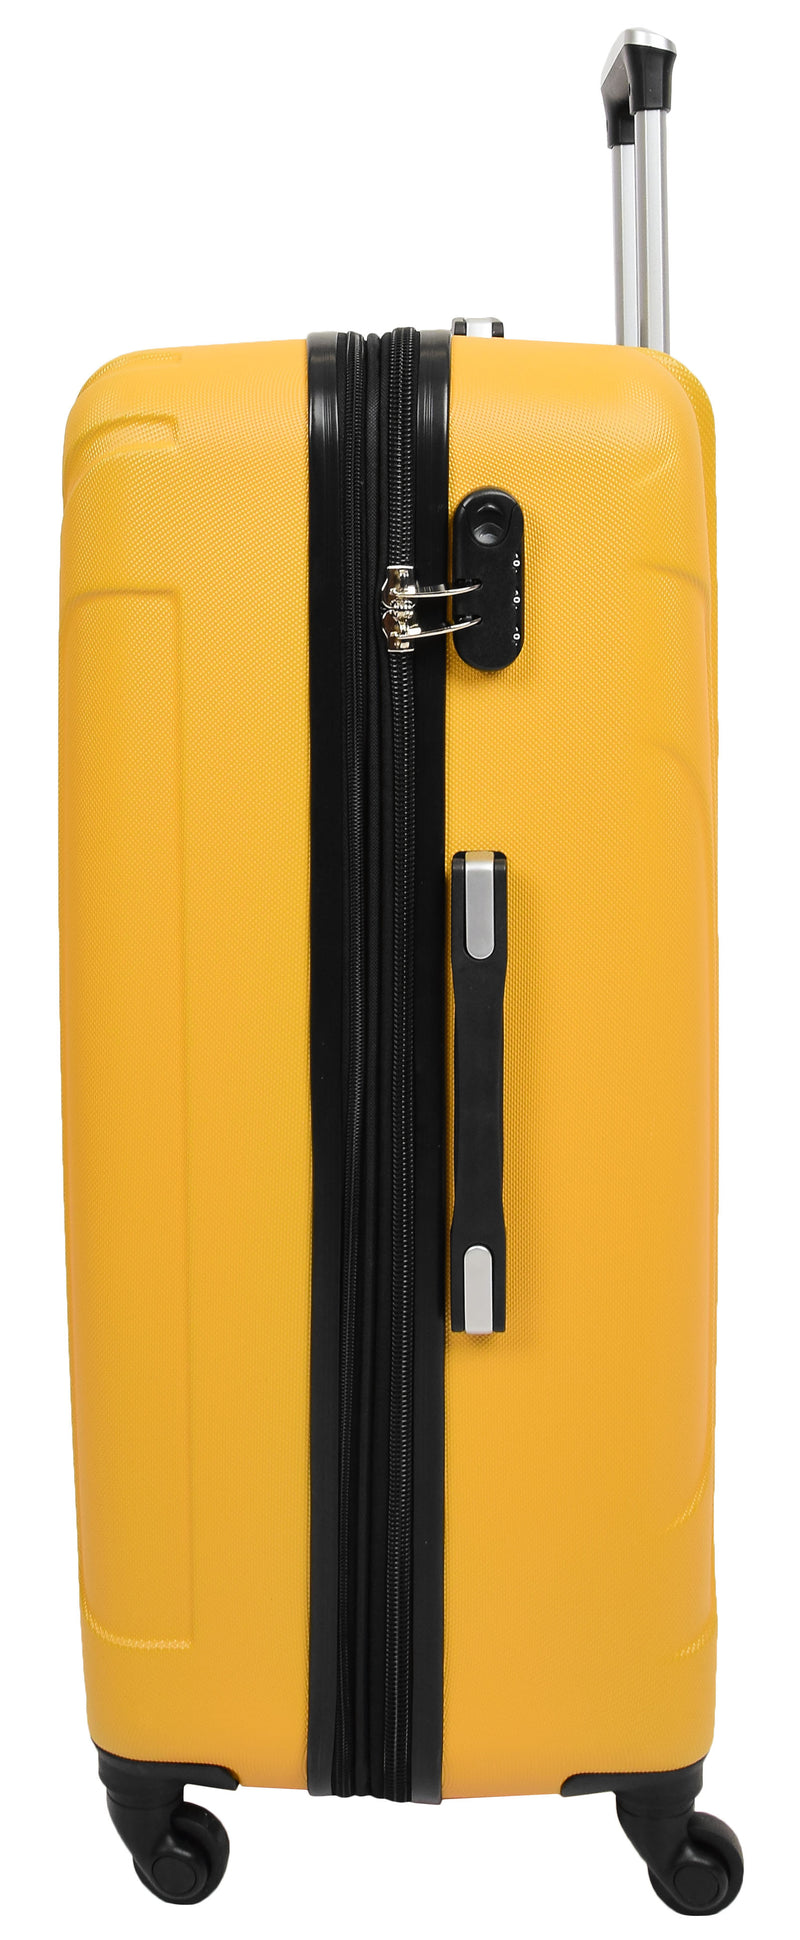 Hard Shell Four Wheel Expandable Luggage Digit Lock Sonic Yellow